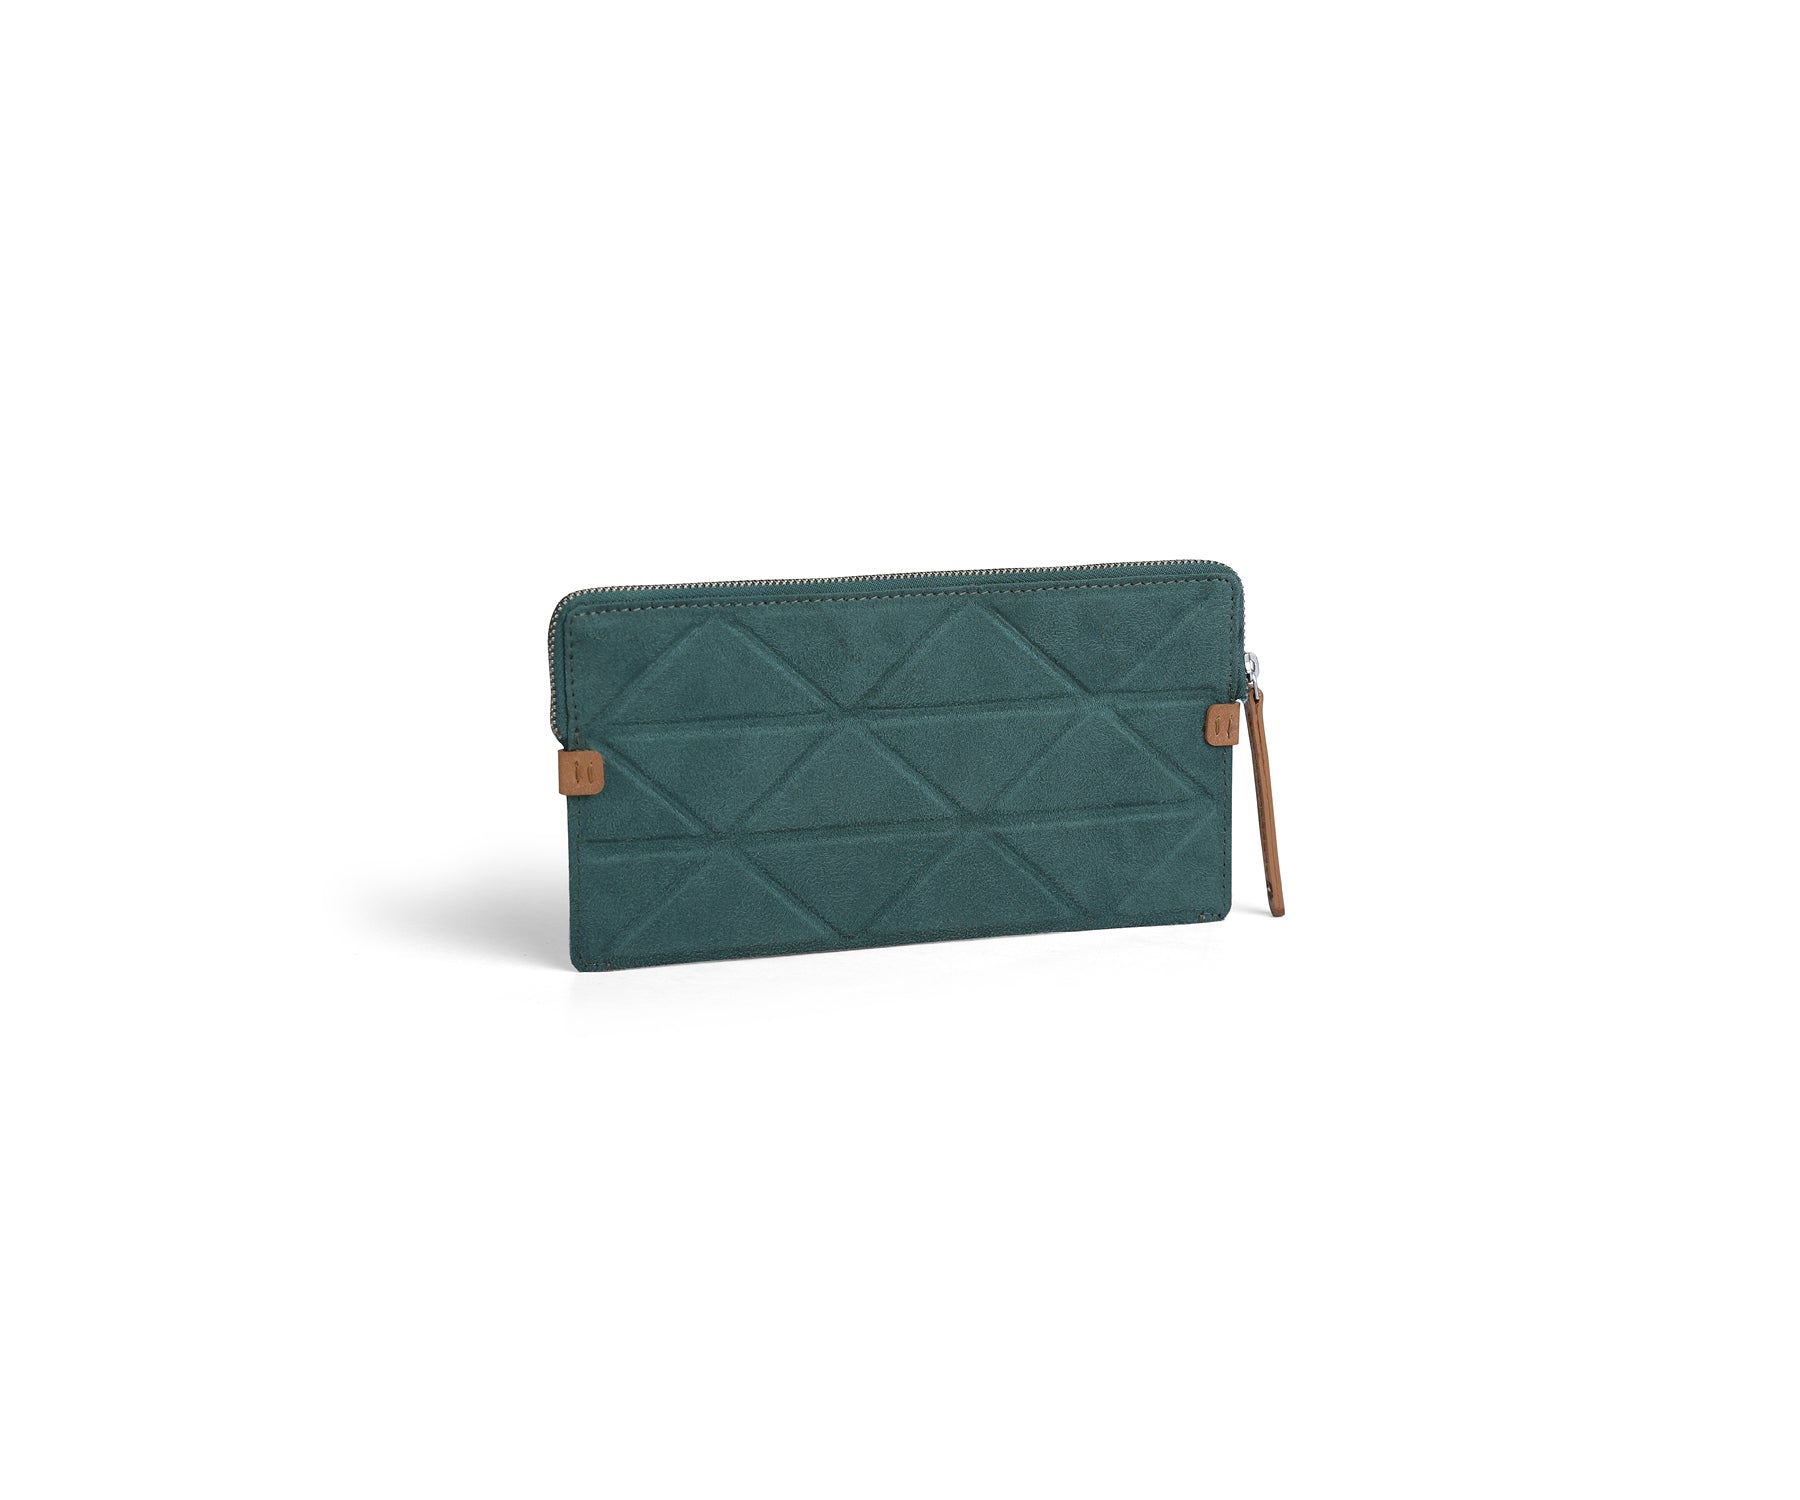 Buy Trigon Small Green Sleeve Bag - Carry Travel Documents, Small Stationary, or Makeup - Taamaa